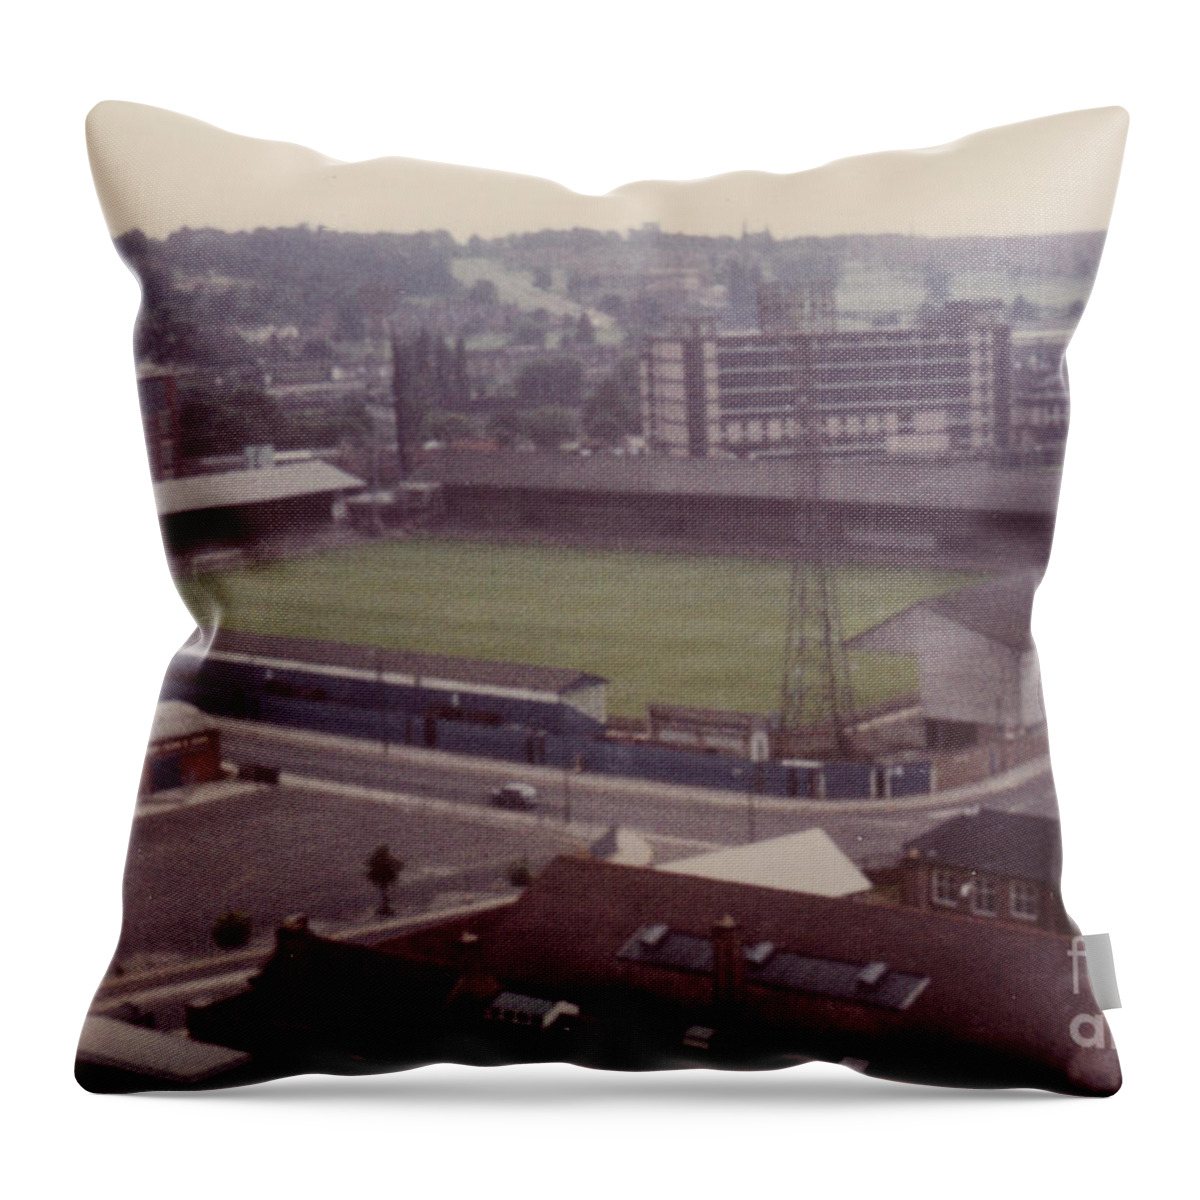  Throw Pillow featuring the photograph Ipswich Town - Portman Road - Aerial View 1 - 1970 by Legendary Football Grounds